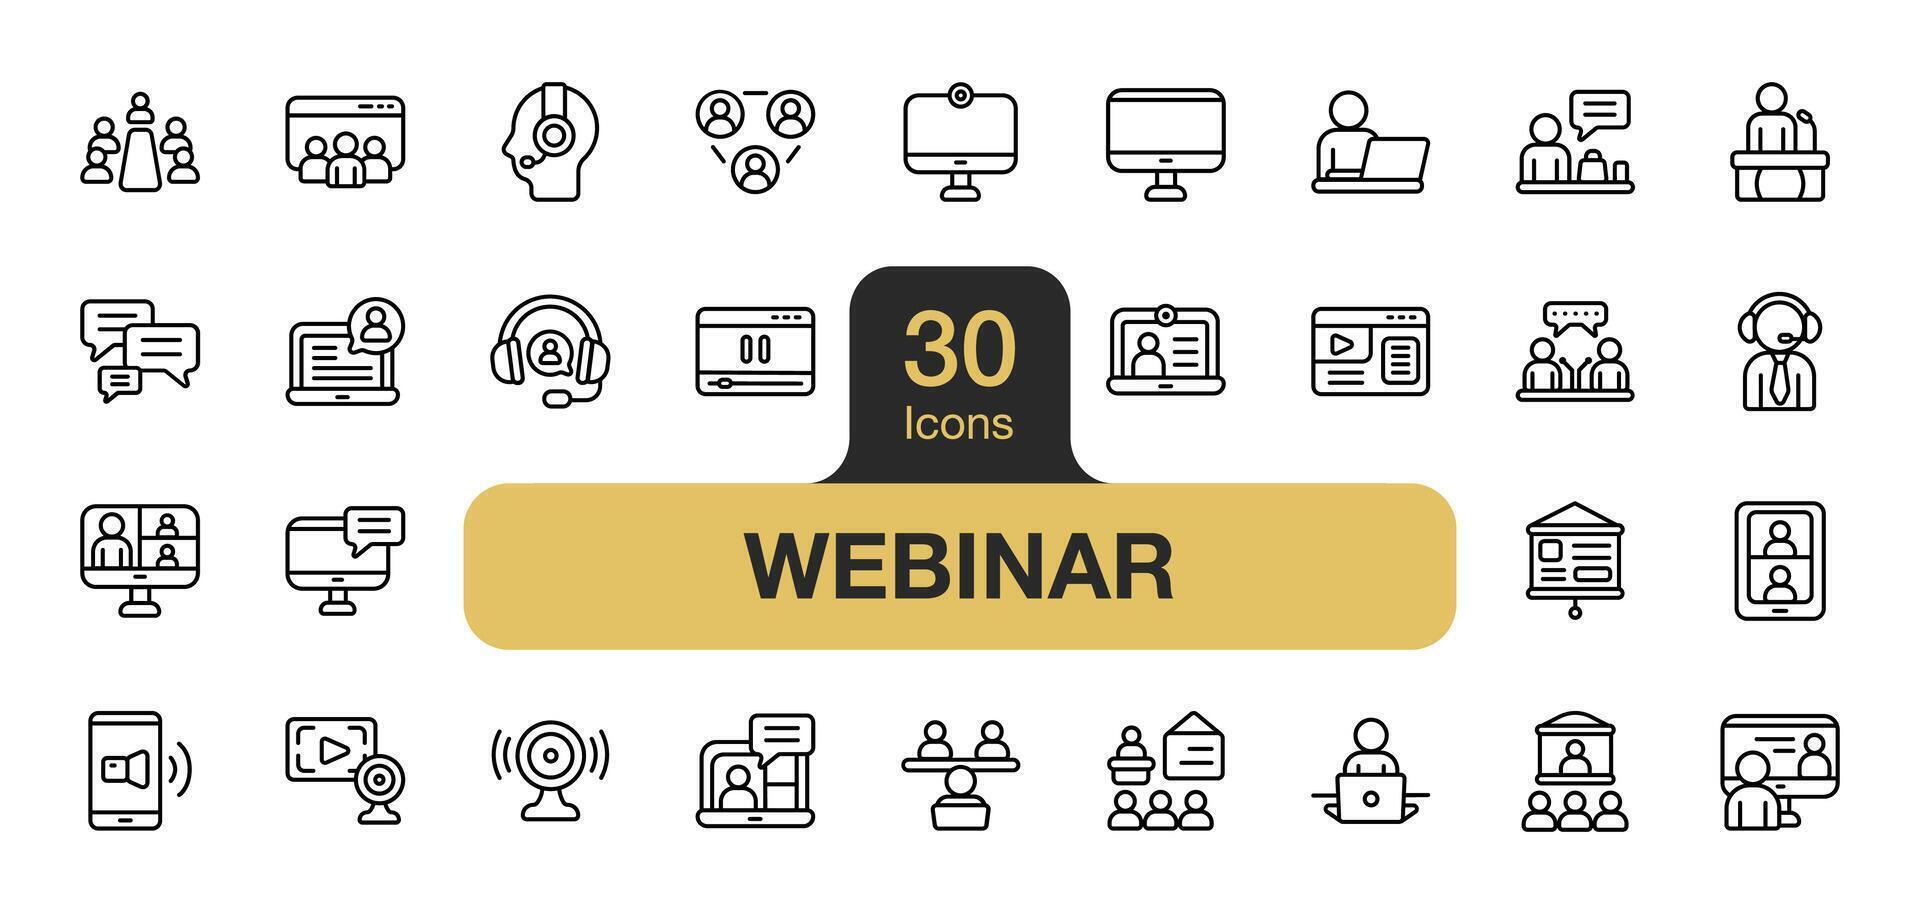 Set of 30 Webinar icon element set. Includes audience, presentation, meeting, listening, seminar, explanation, and More. Outline icons vector collection.